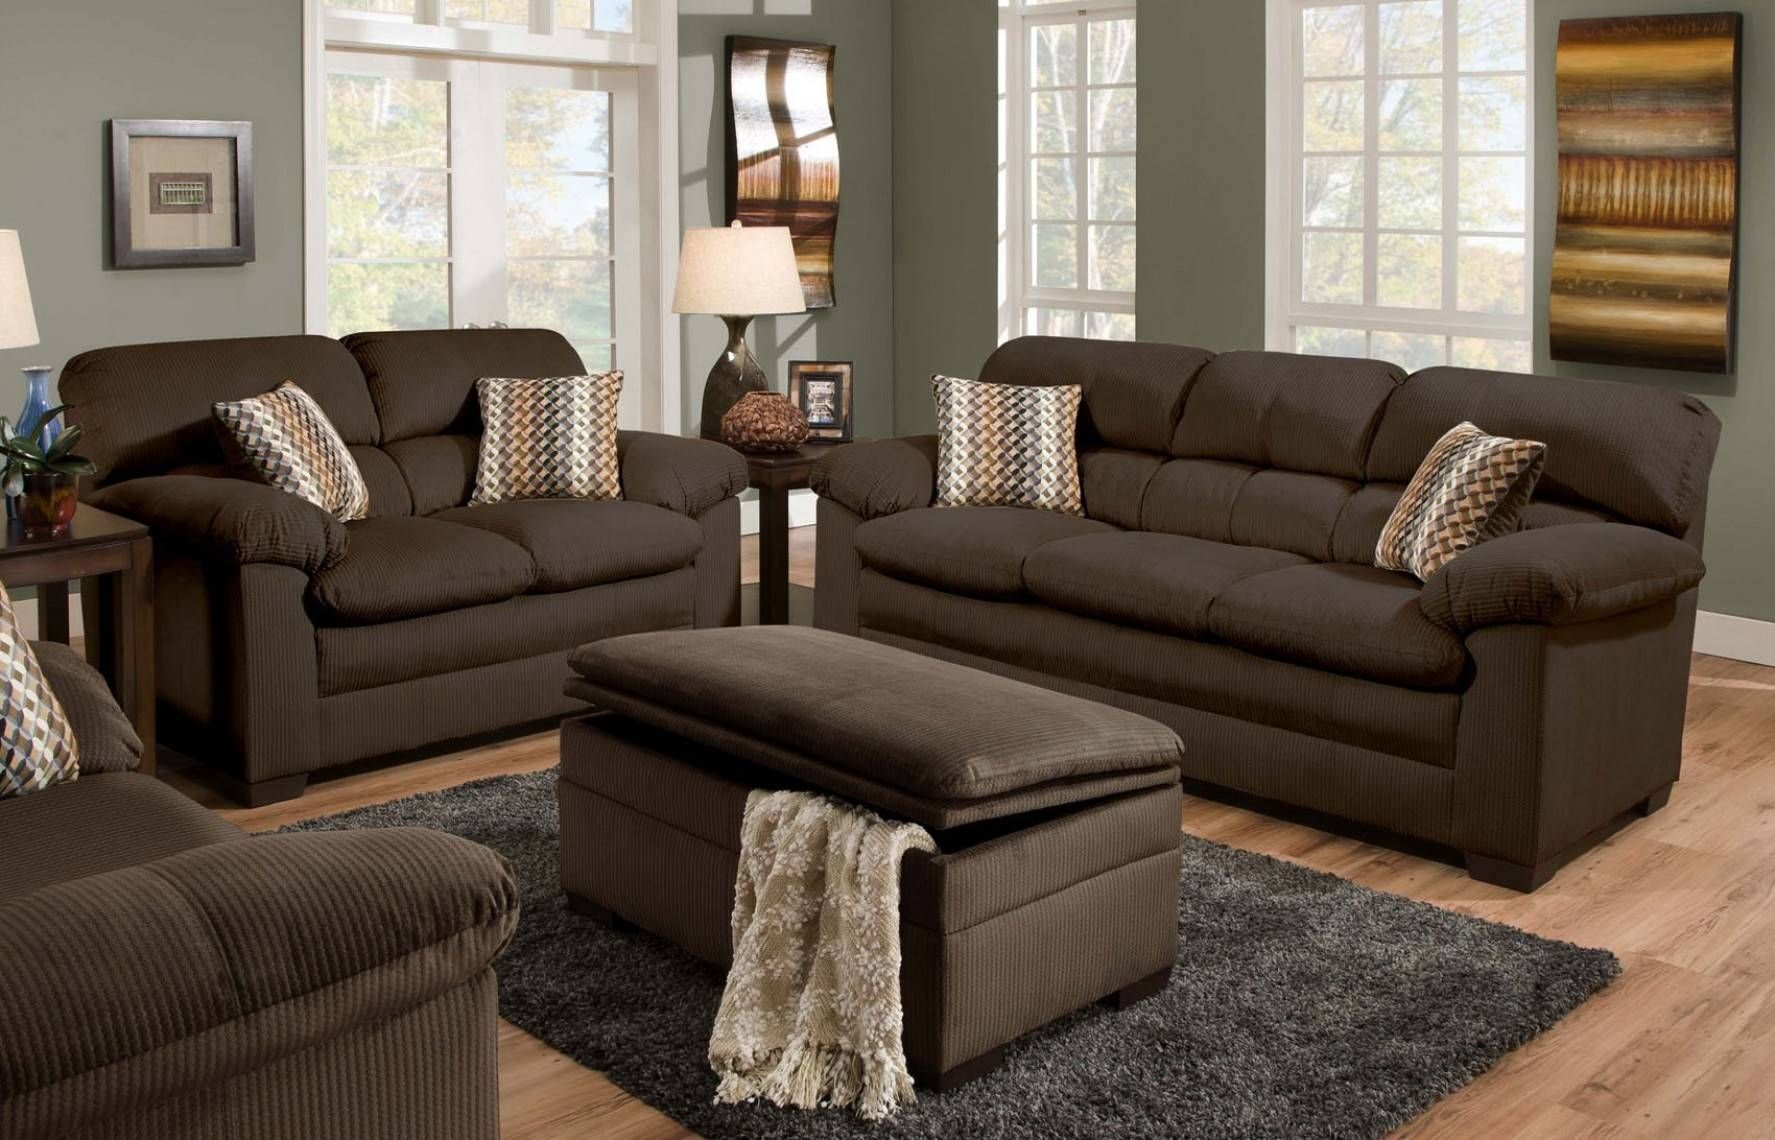 Light Brown Velvet Depp Sectional Sofa With Ottoman And Cushions Pertaining To Sectional Sofa With Oversized Ottoman (View 19 of 30)